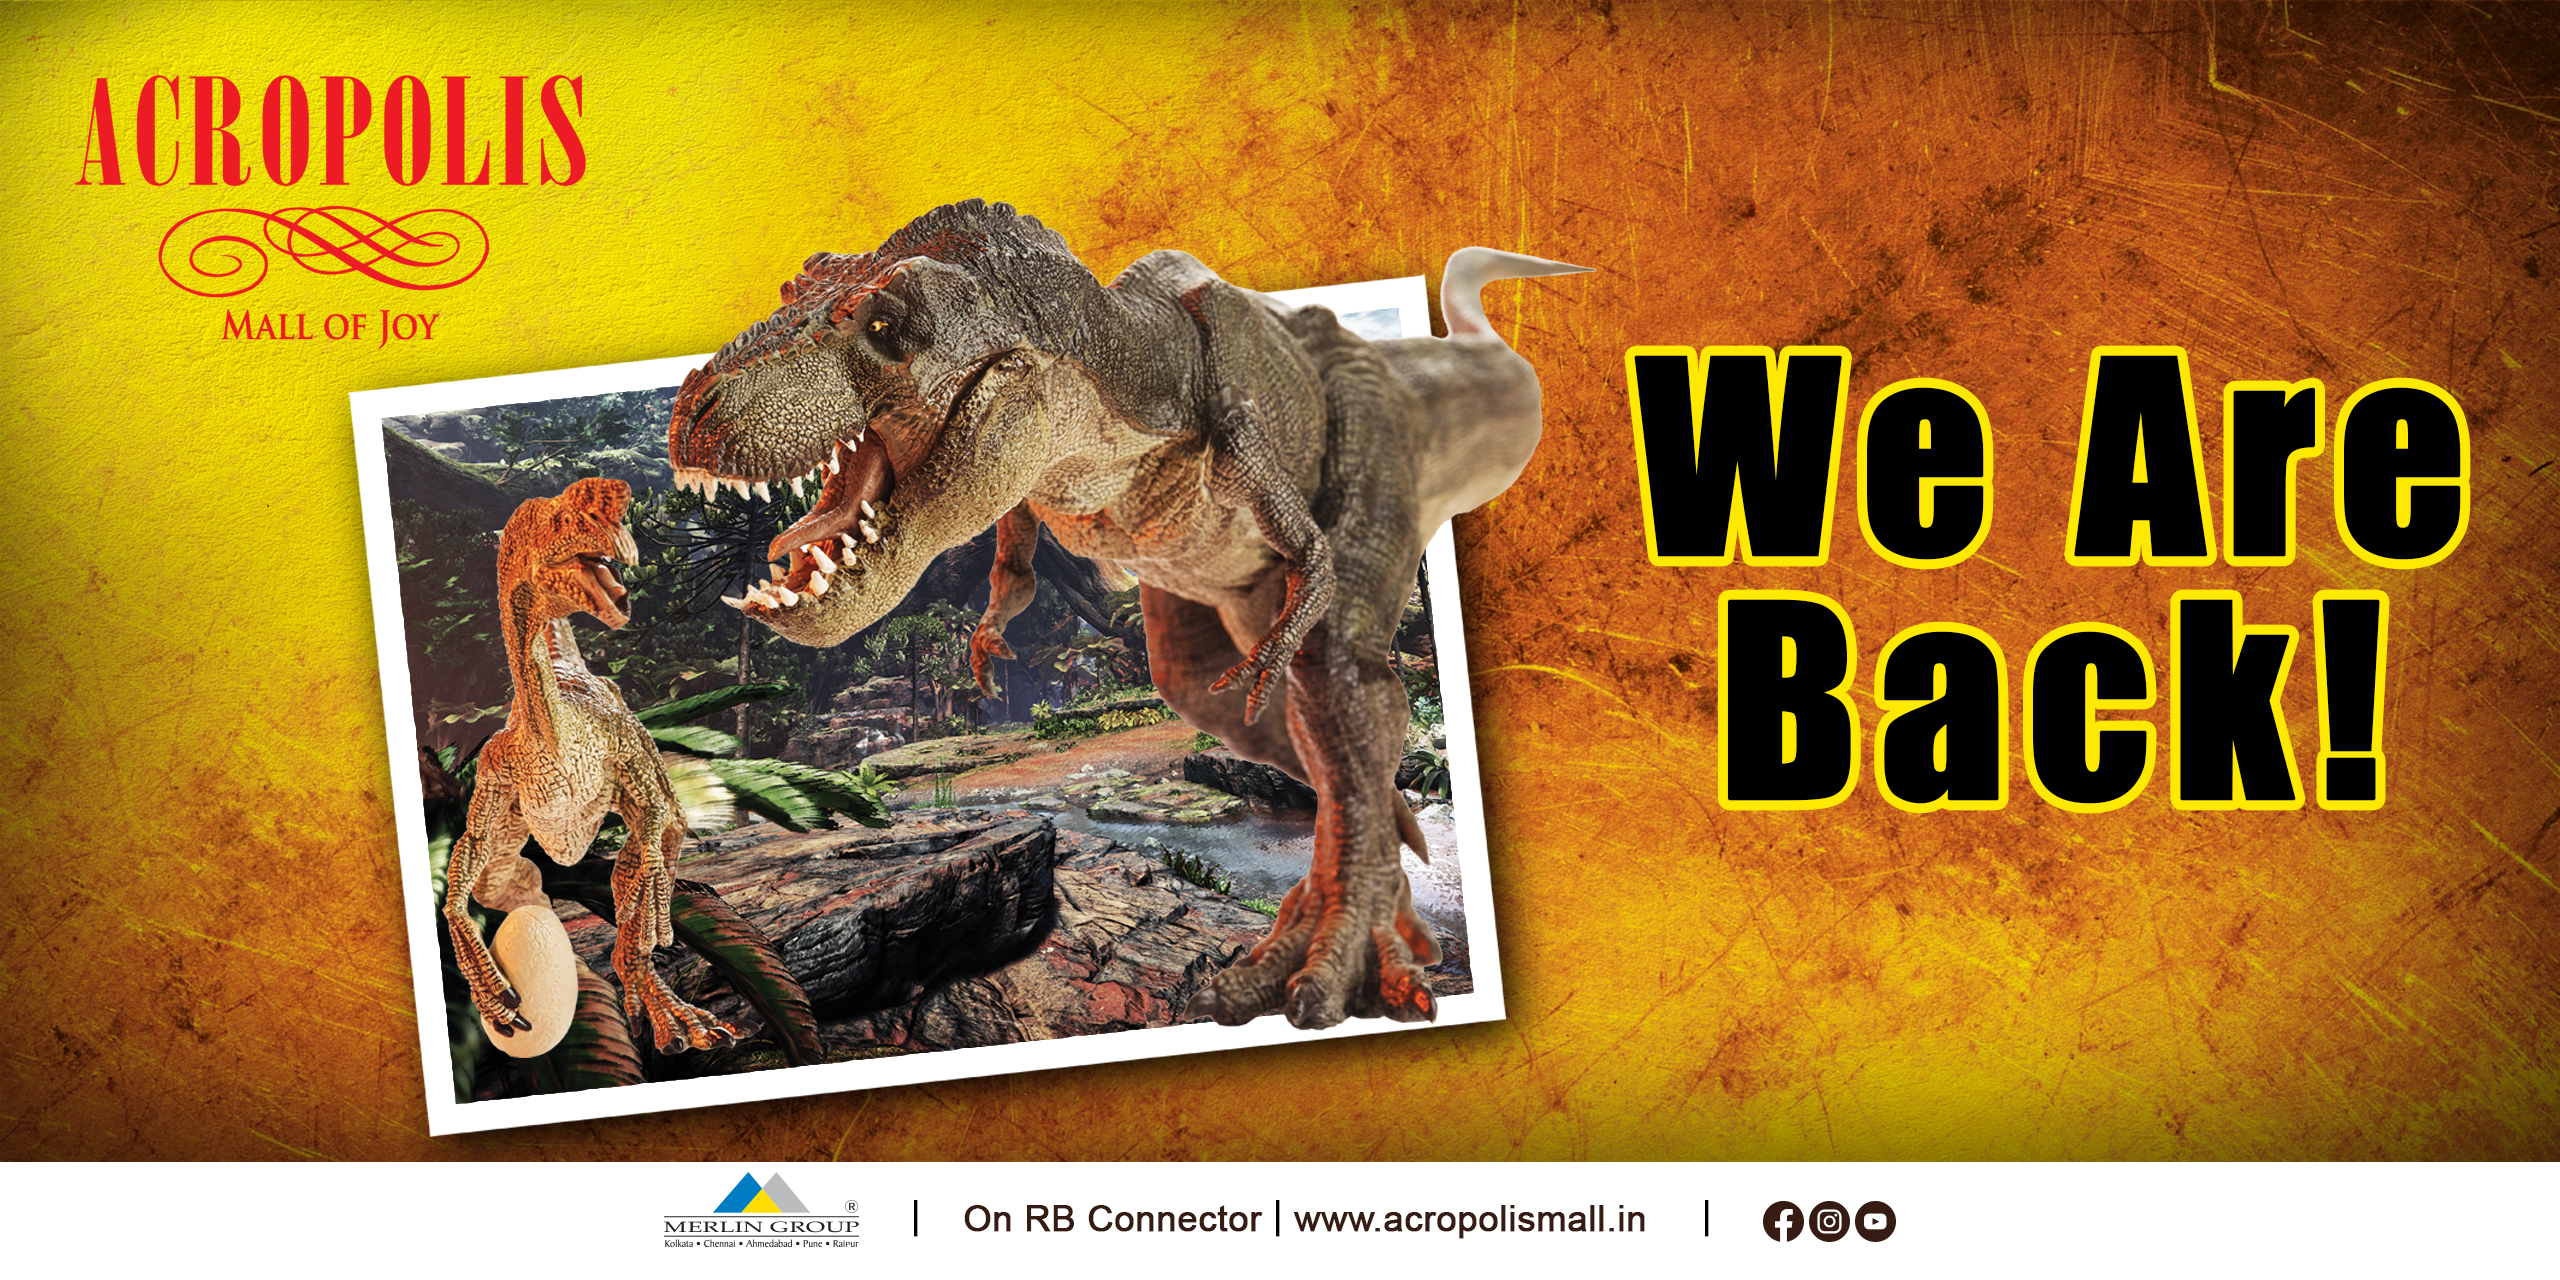 The mesmerizing Winter Dino show is back at Acropolis mall after 4 years